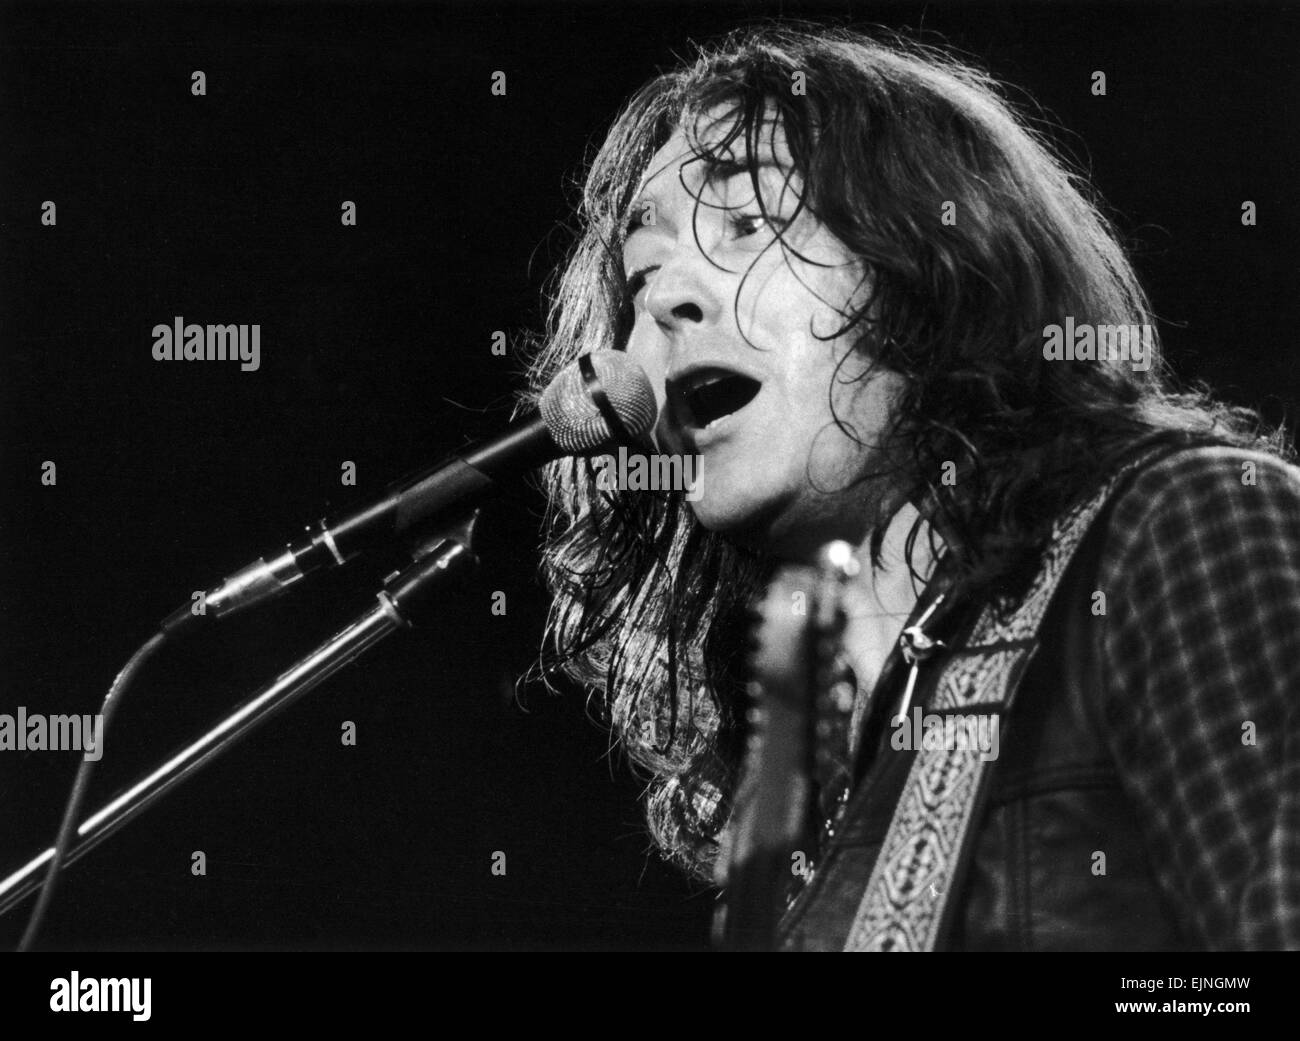 Irish blues rock musician and singer Rory Gallagher piuctured performing in concert during his tour of Europe. April 1982. Stock Photo